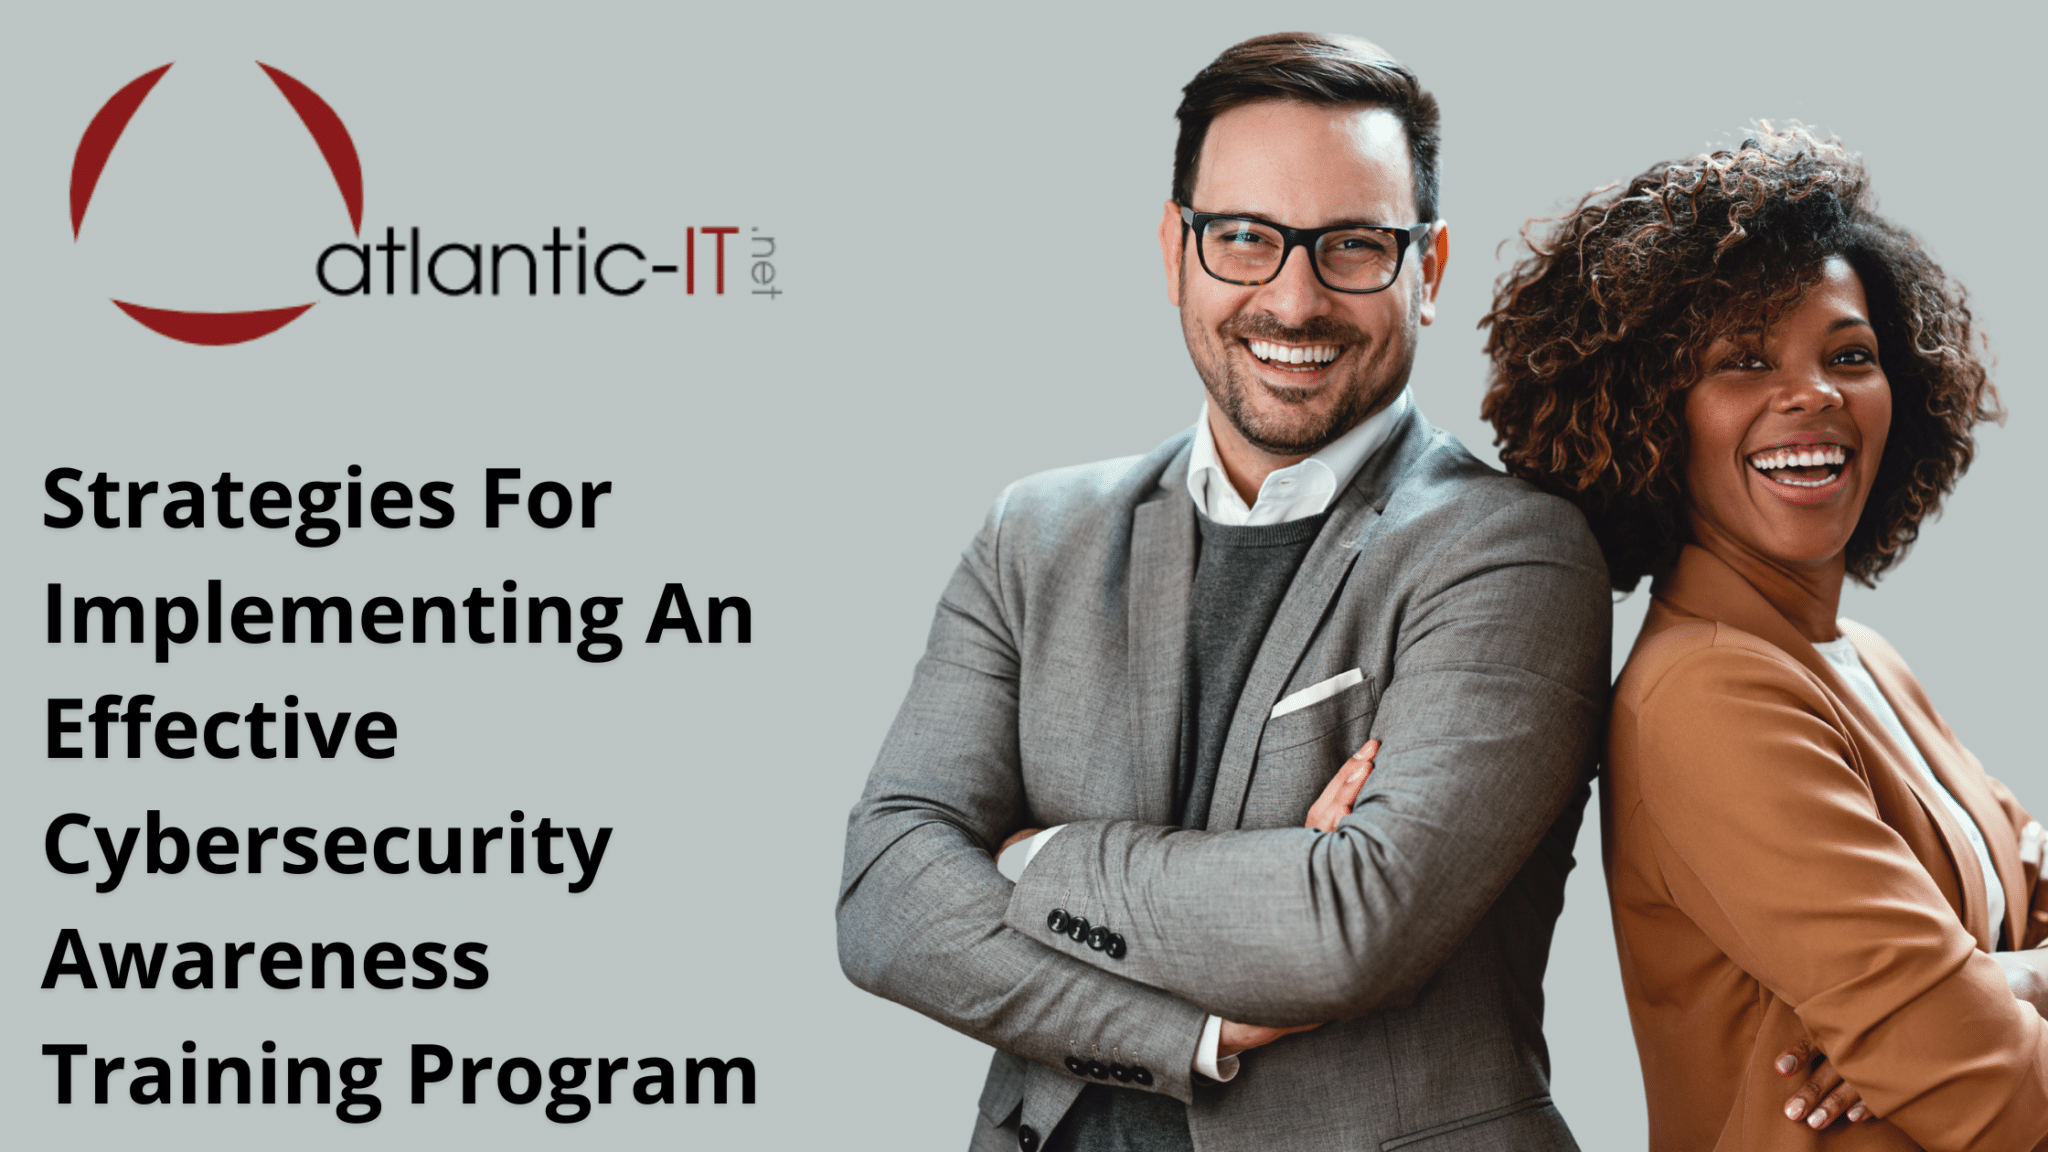 Strategies For Implementing An Effective Cybersecurity Awareness Training Program